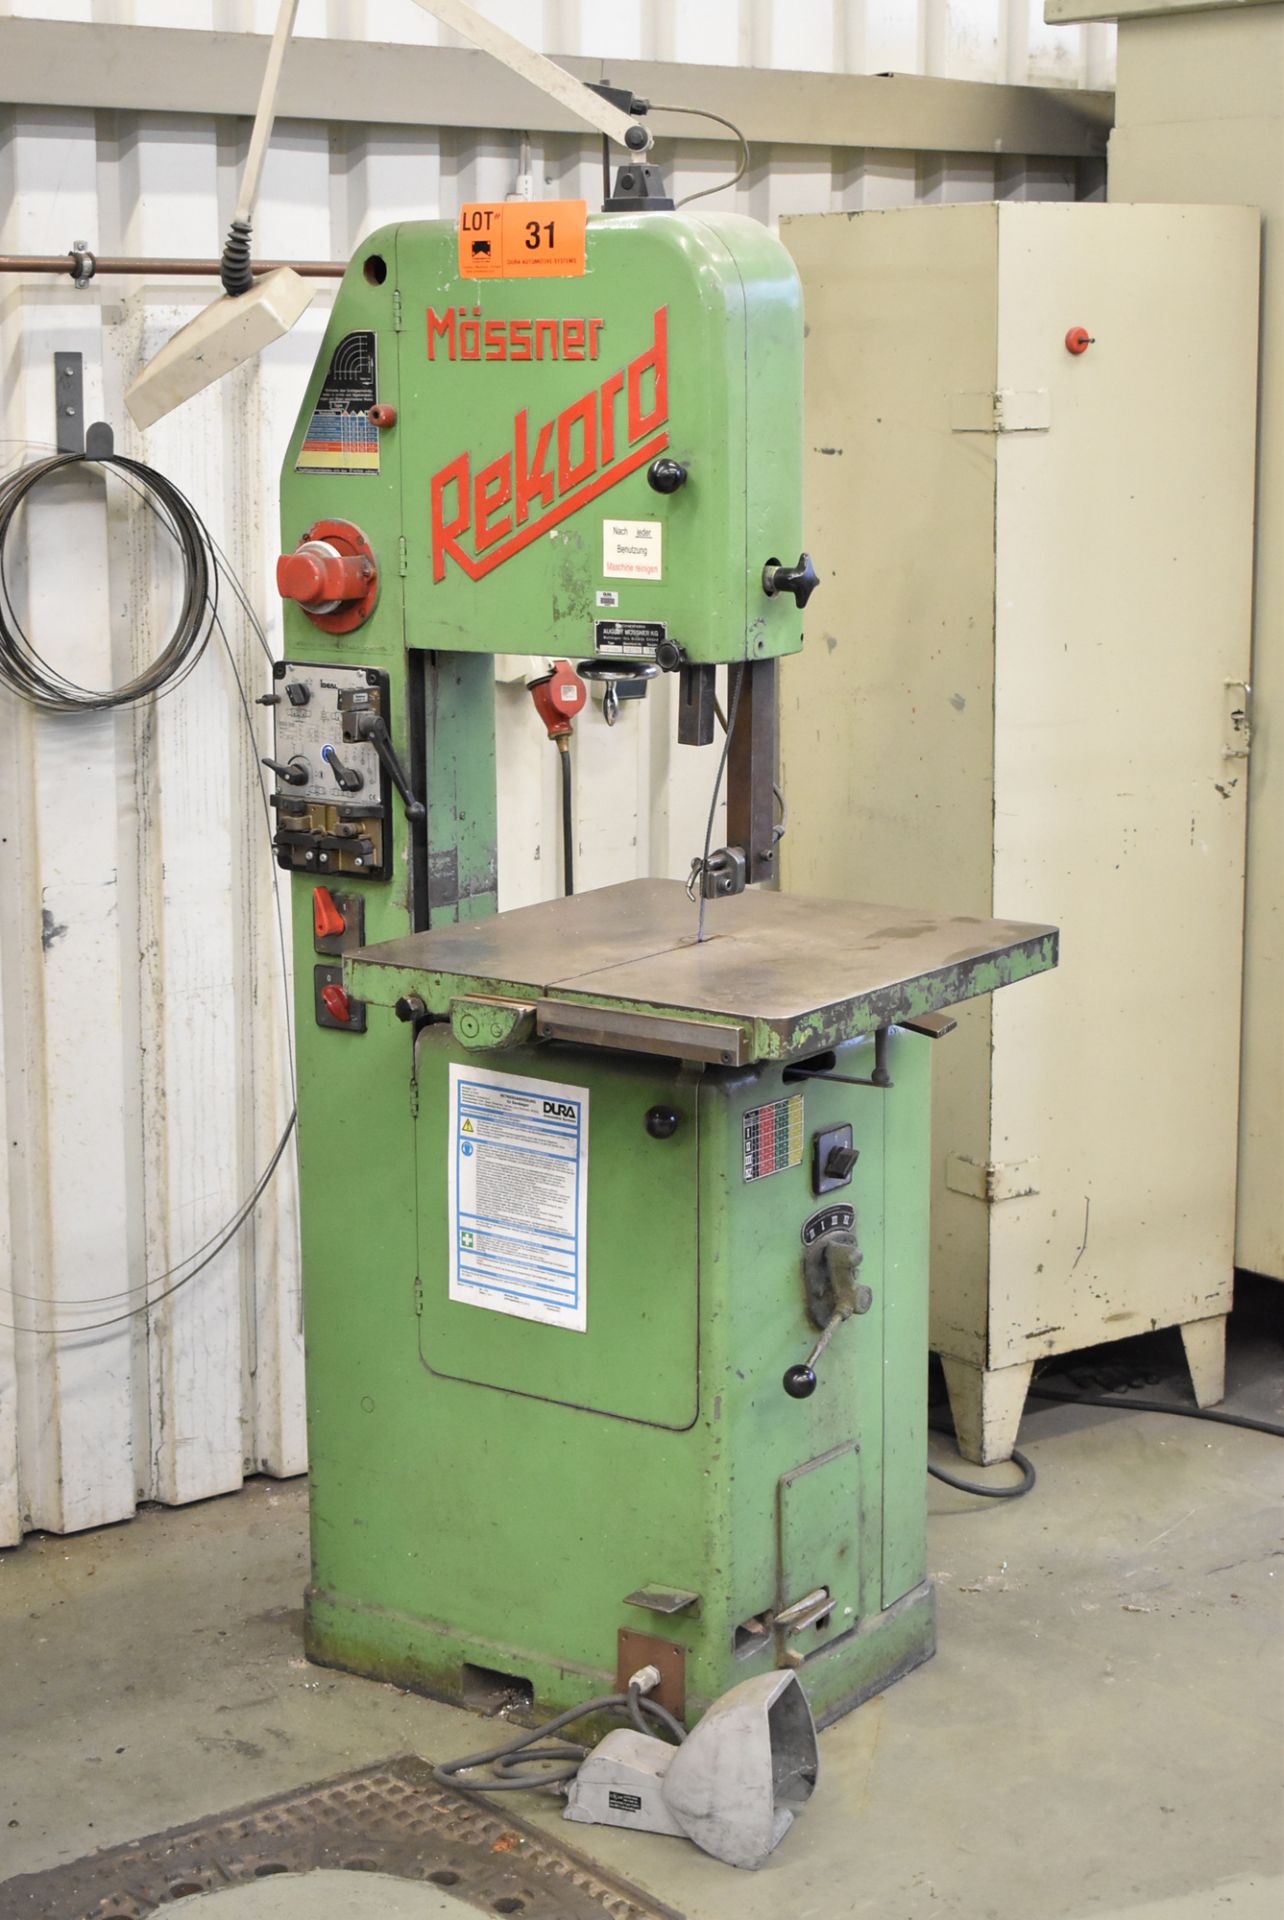 MOSSNER SN/400 VERTICAL BAND SAW WITH 390 MM THROAT, 600 MM X 600 MM TABLE, 200 MM MAX WORK PIECE